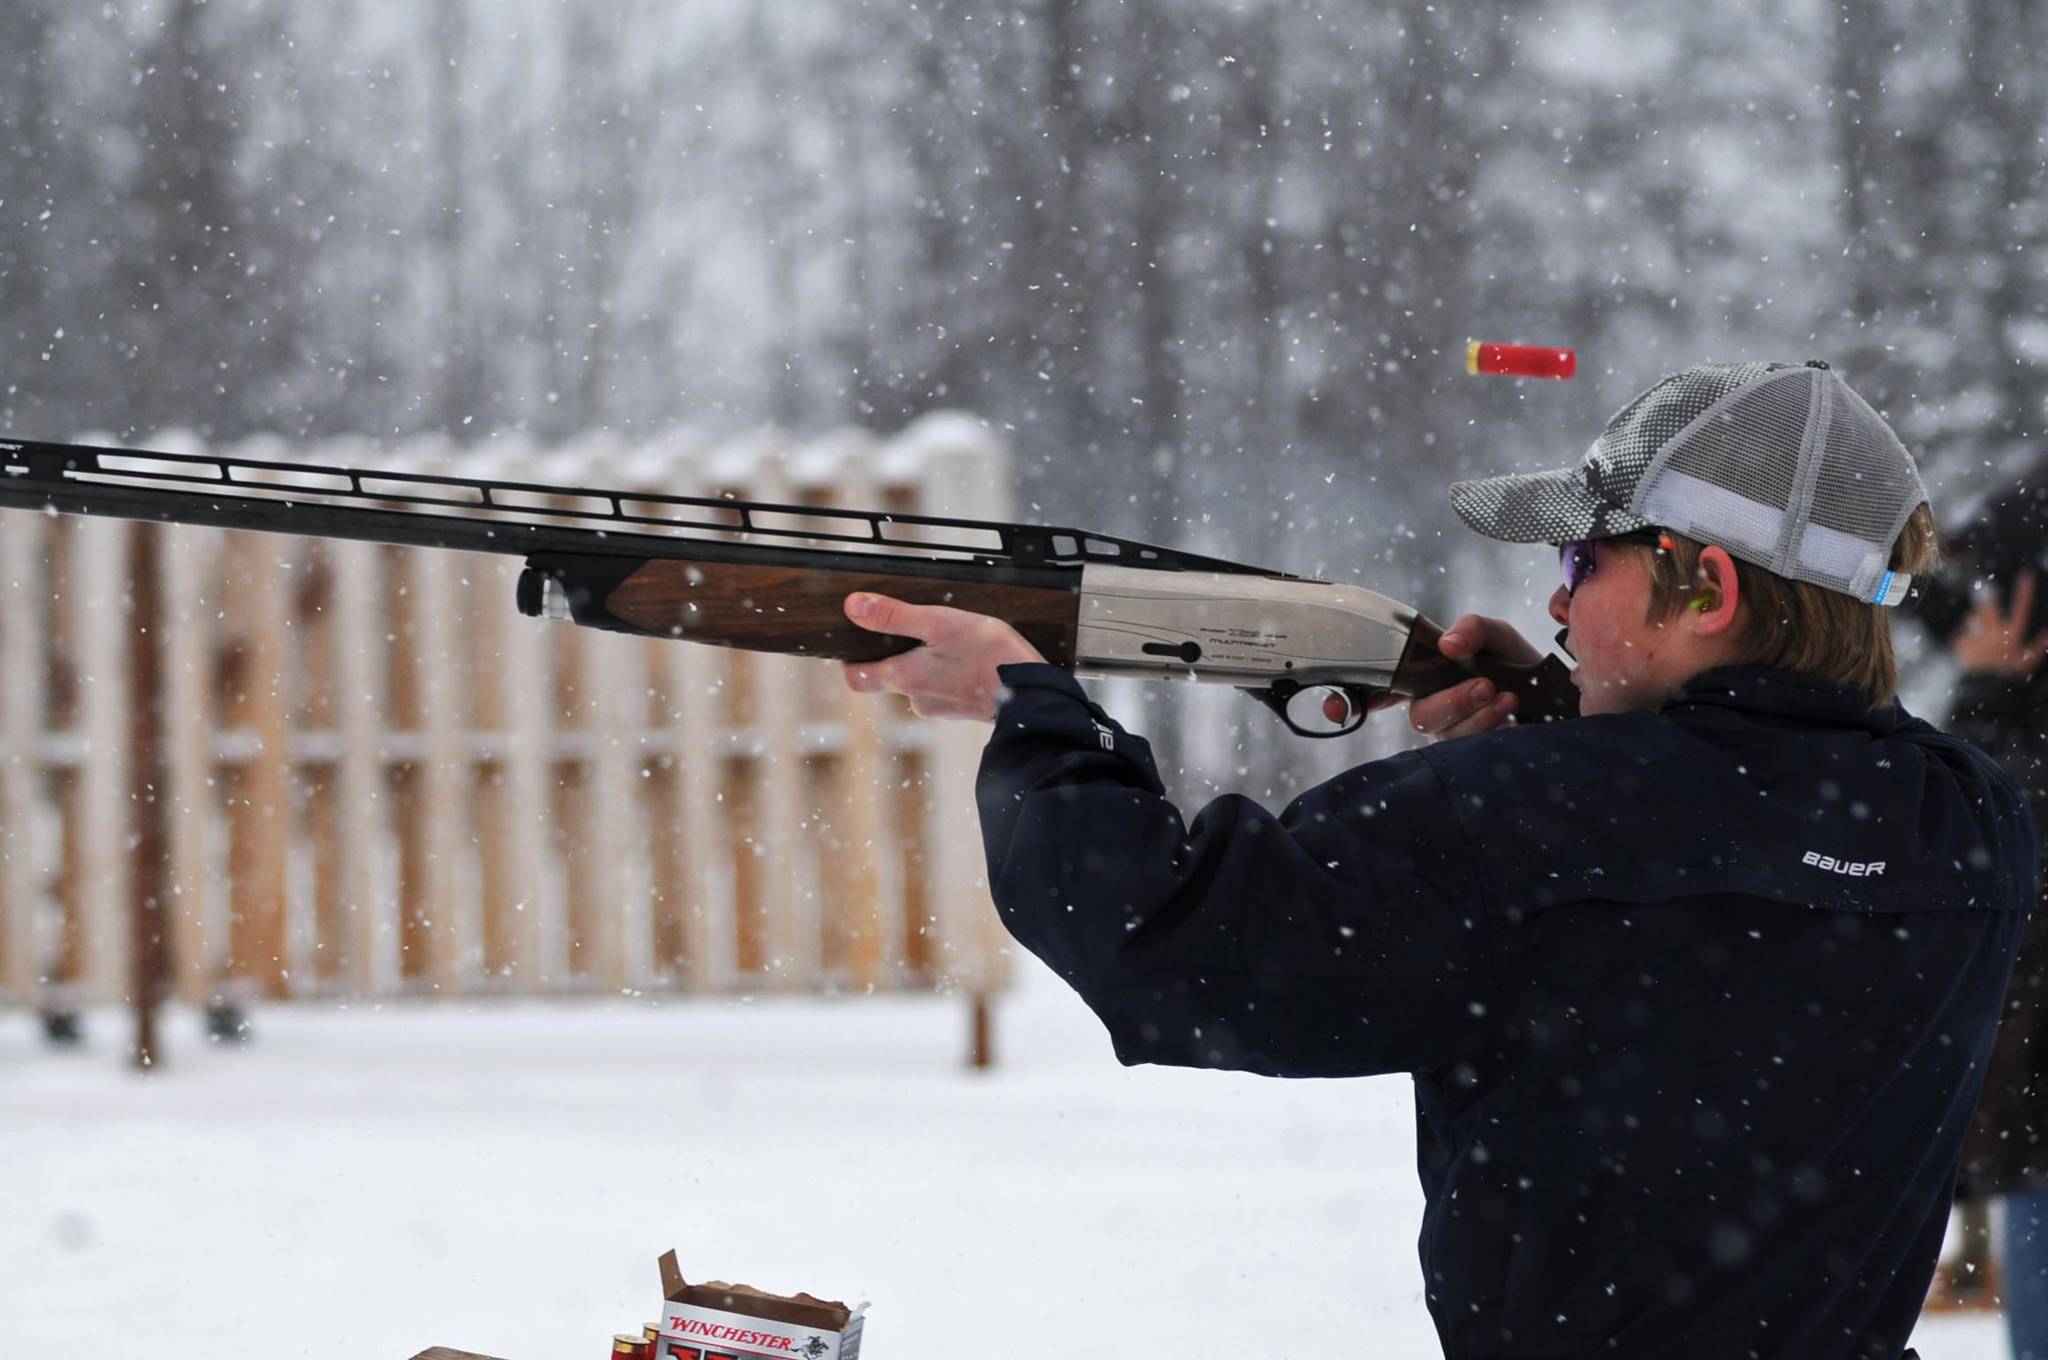 Dawson Lockwood lets off a shot at a flying clay target through filtering snow during an event at the Snowshoe Gun Club on Sunday, Nov. 19, 2017 in Kenai, Alaska. A group of shooters gathered at the shooting range Sunday as part of the club’s annual Thanksgiving event, which features “Annie Oakley” trap shooting game as well as several other events. Despite the snow, a number of people turned out to try the shooting games and to enjoy the warm central building on a chilly Sunday afternoon. (Photo by Elizabeth Earl/Peninsula Clarion)